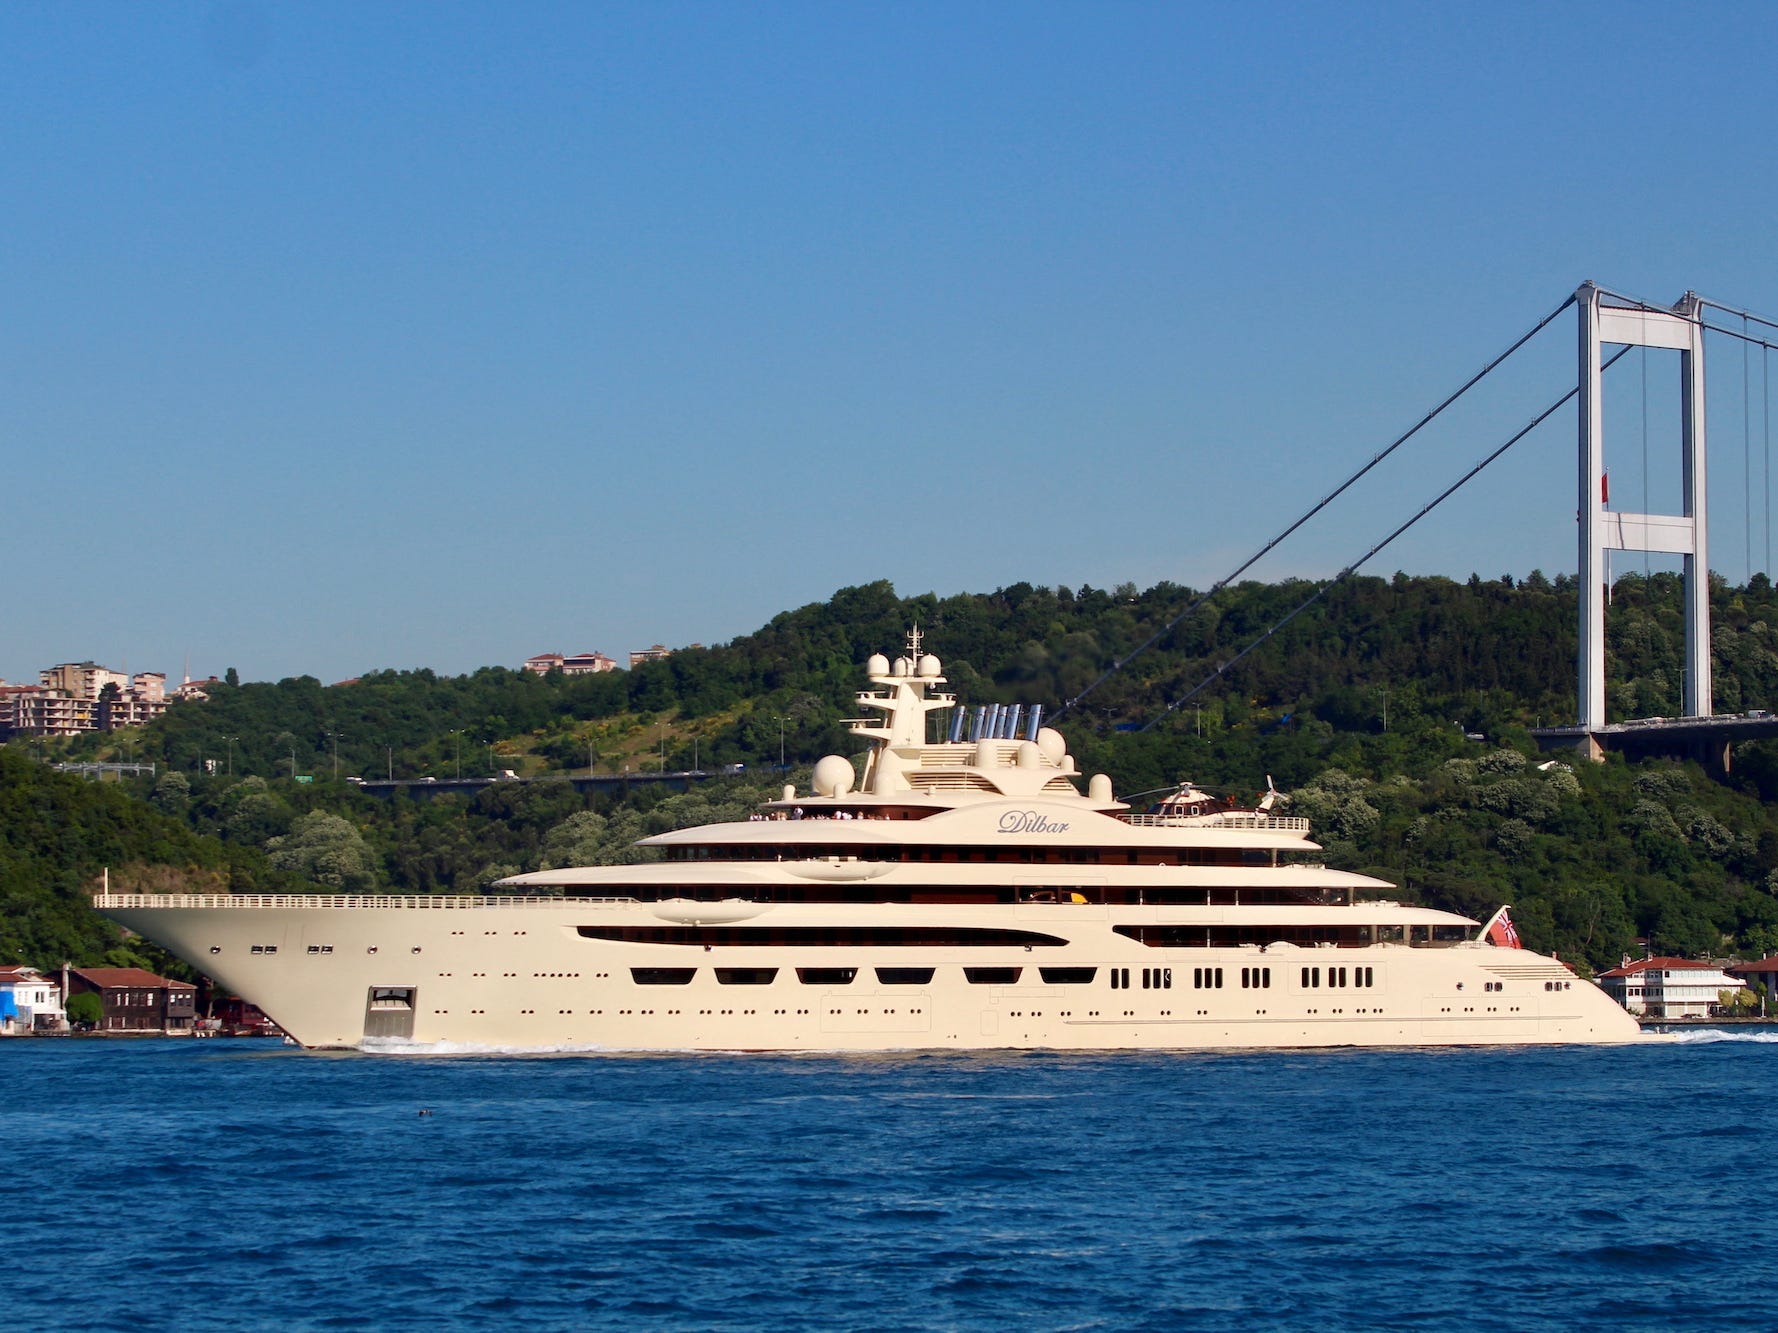 A yacht, the Dilbar, owned by Alisher Usmanov, is seen against a blue sea and sky in the Bosphorus in 2019.